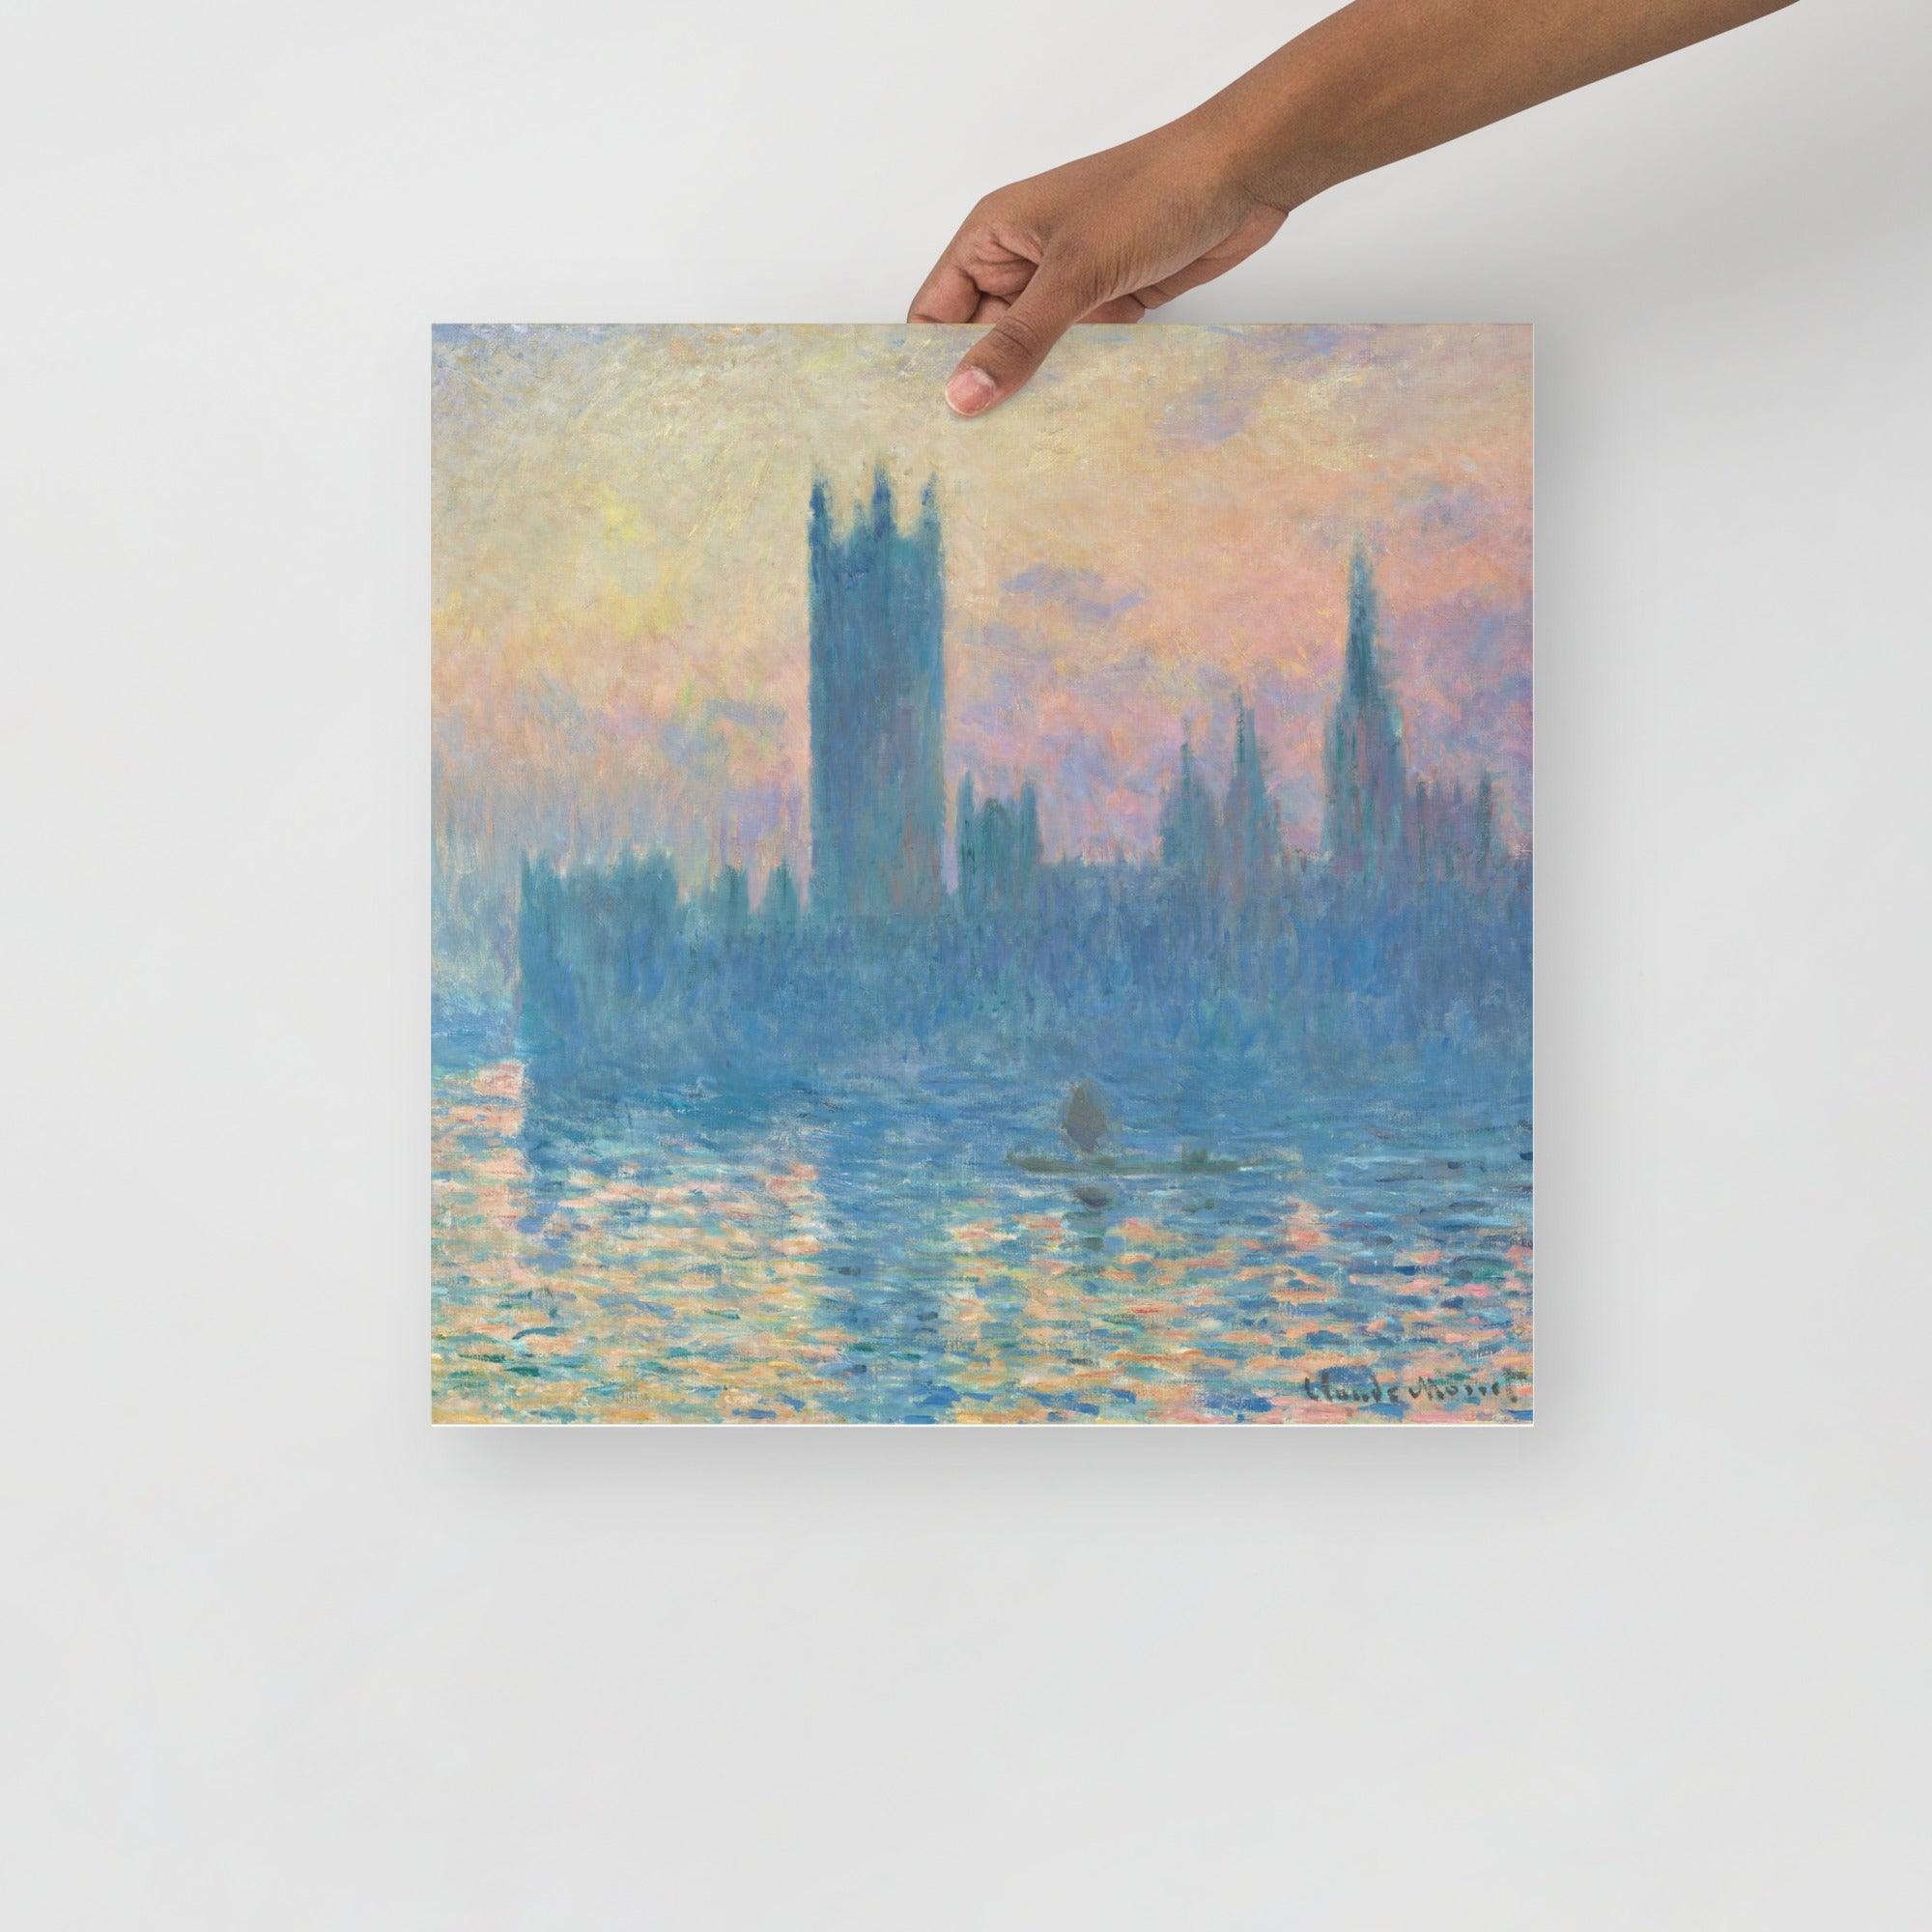 The Houses of Parliament, Sunset by Claude Monet poster on a plain backdrop in size 16x16”.